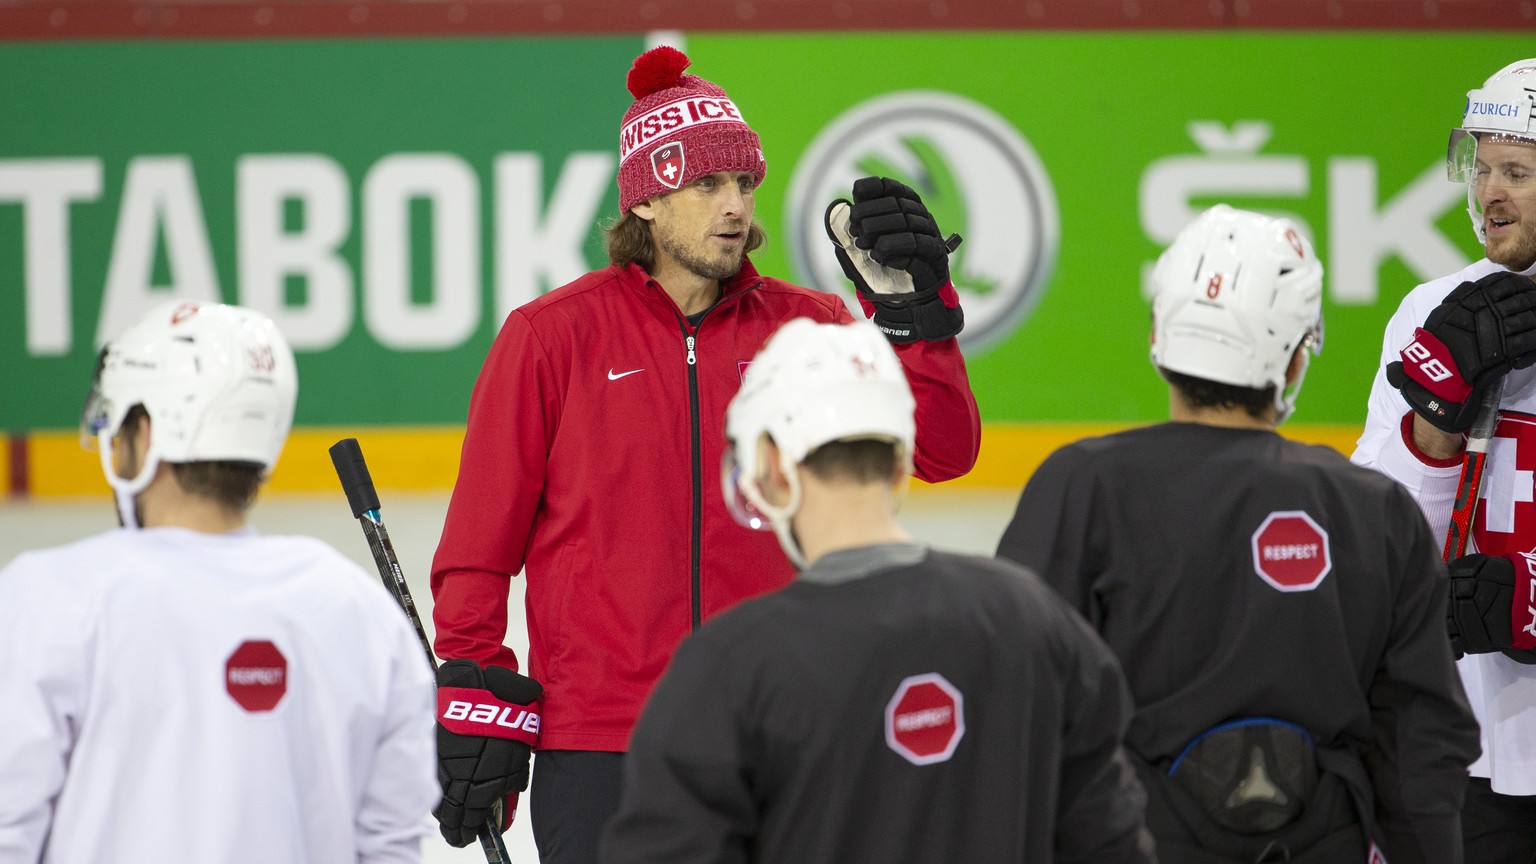 Patrick Fischer, head coach of Switzerland national ice hockey team, instructs his players during a training session, at the IIHF 2021 World Championship quarter final game between Switzerland and Ger ...